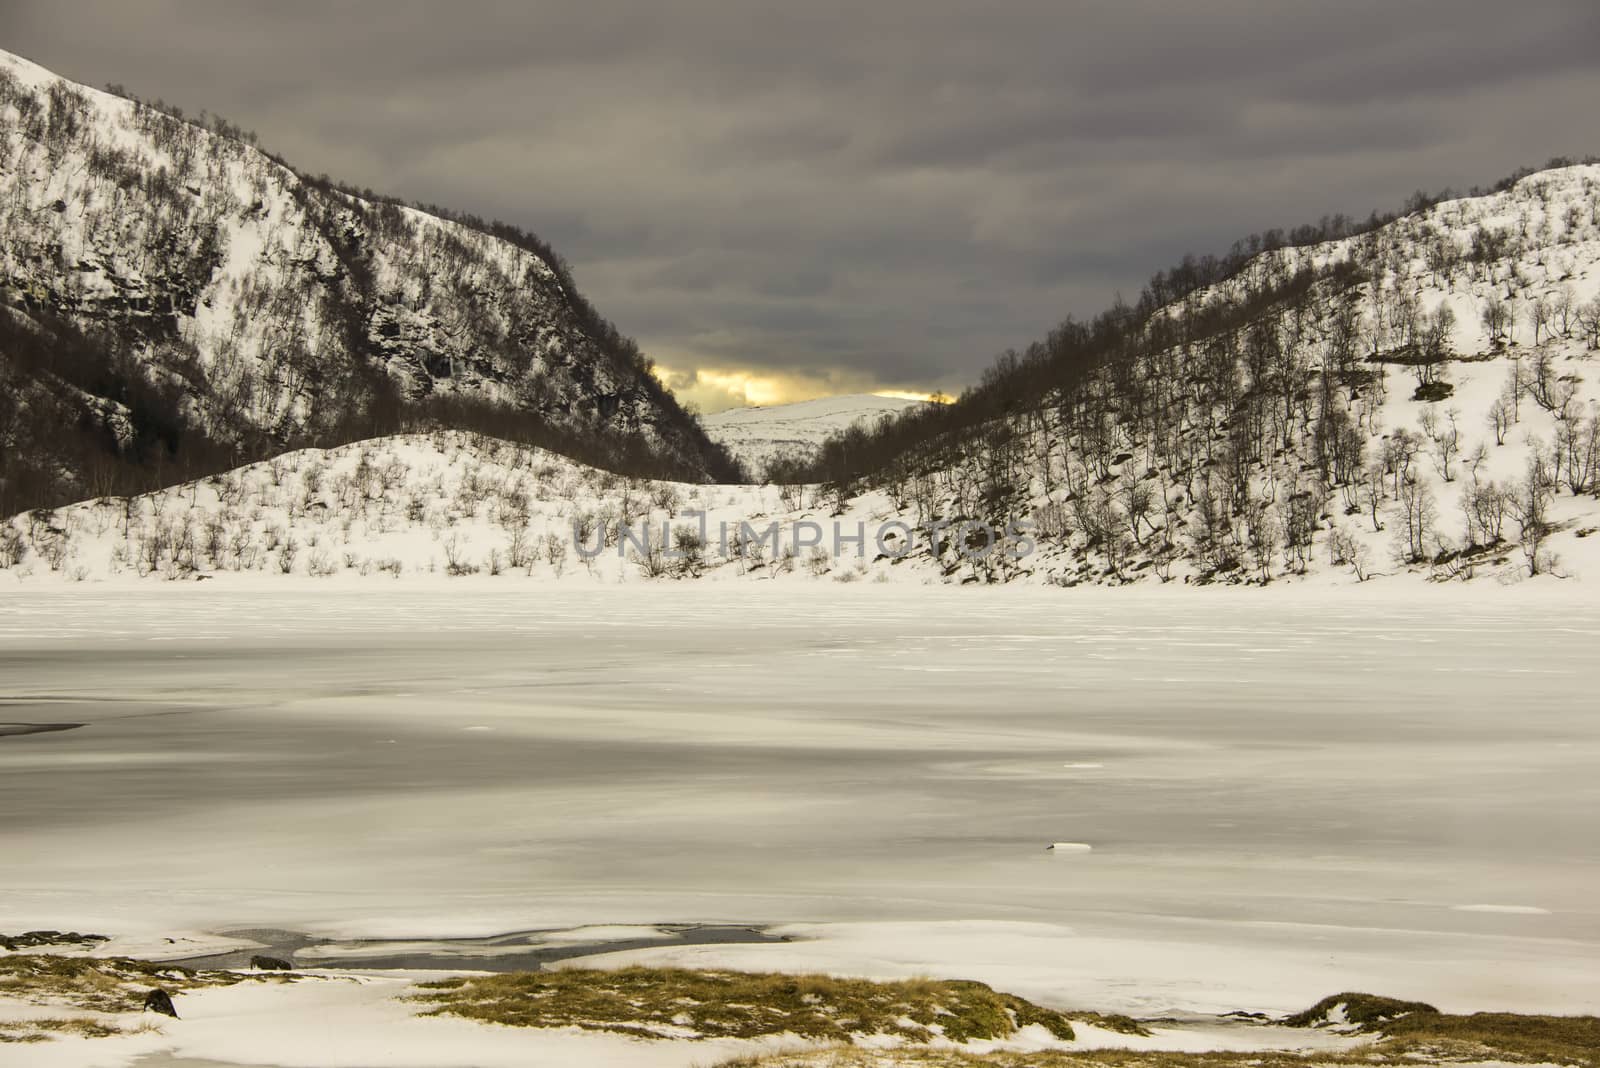 Winter landscape with snow, a frozen lake and a sunset far away